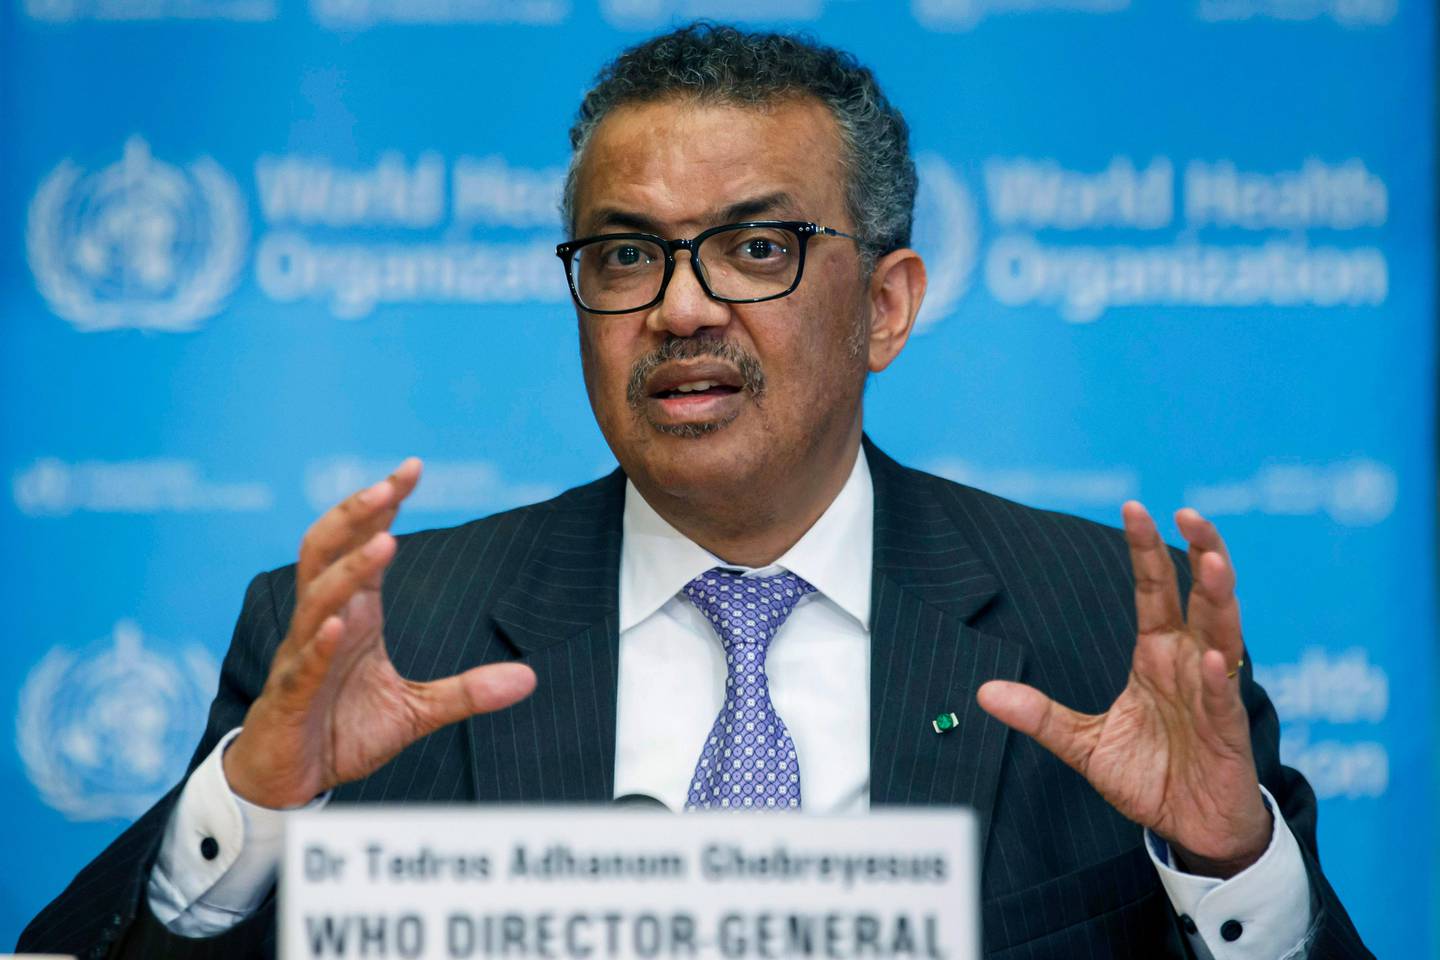 FILE - In this Monday, March 9, 2020 file photo, Tedros Adhanom Ghebreyesus, Director General of the World Health Organization speaks during a news conference on updates regarding COVID-19, at the WHO headquarters in Geneva, Switzerland. The head of the World Health Organization said the U.N. health agency would not recommend any COVID-19 vaccine before it is proved safe and effective, even as Russia and China have started using their experimental vaccines before large studies have finished and other countries have proposed streamlining authorization procedures.  At a press briefing on Friday, Sept. 4, 2020, Tedros Adhanom Ghebreyesus said vaccines have been used successfully for decades and credited them with eradicating smallpox and bringing polio to the brink of being eliminated.(Salvatore Di Nolfi/Keystone via AP, file)